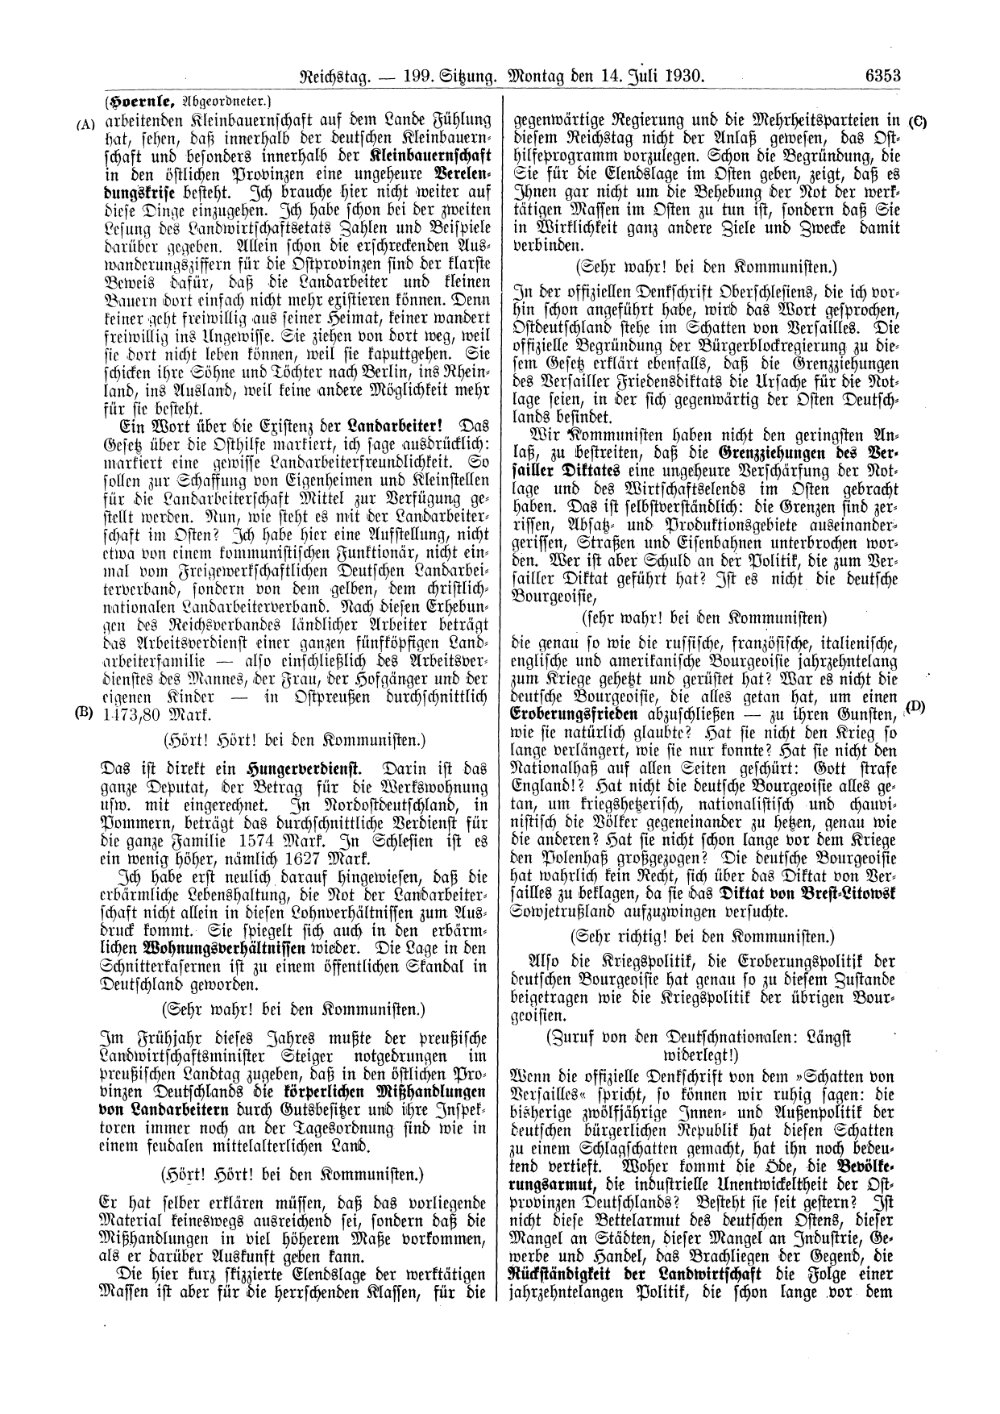 Scan of page 6353